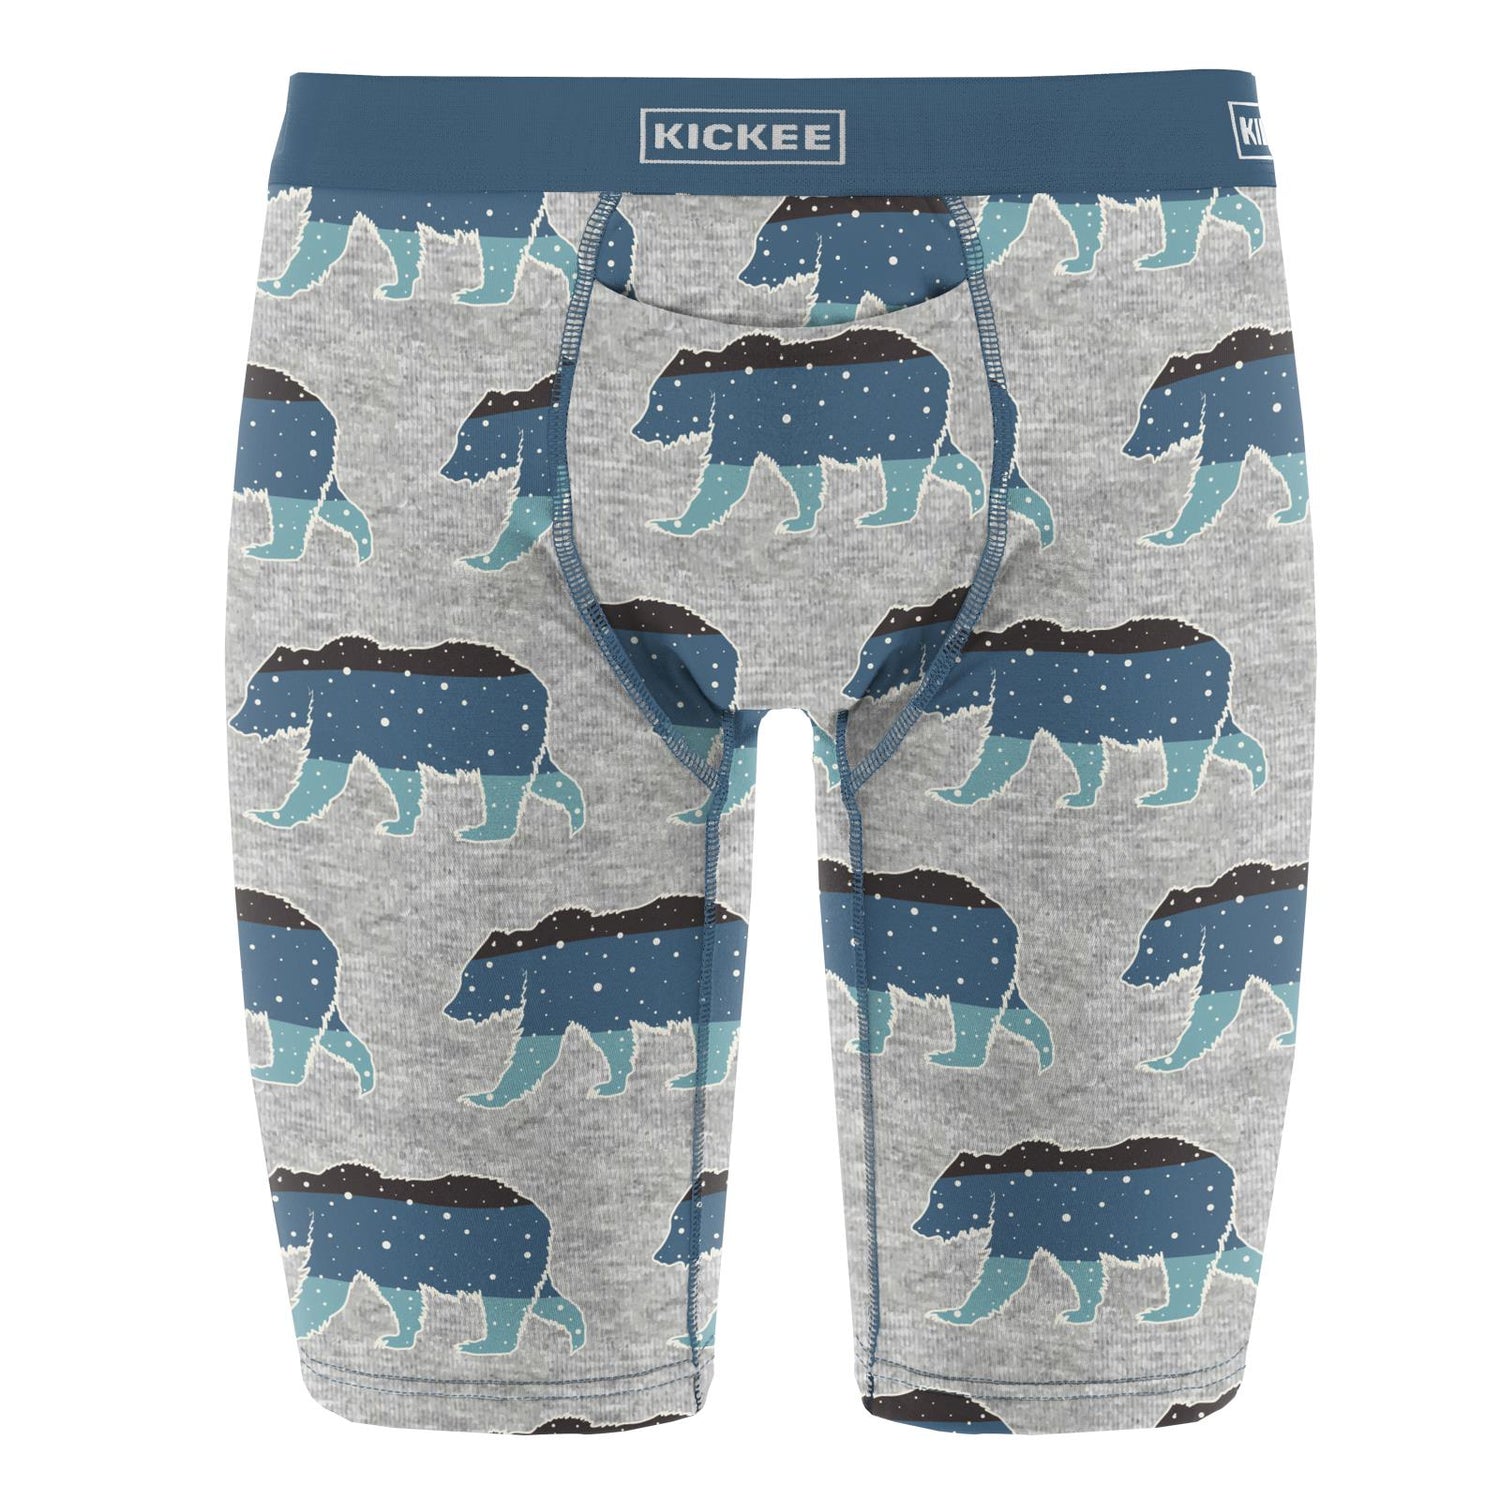 Men's Print Long Boxer Brief with Top Fly in Heathered Mist Night Sky Bear